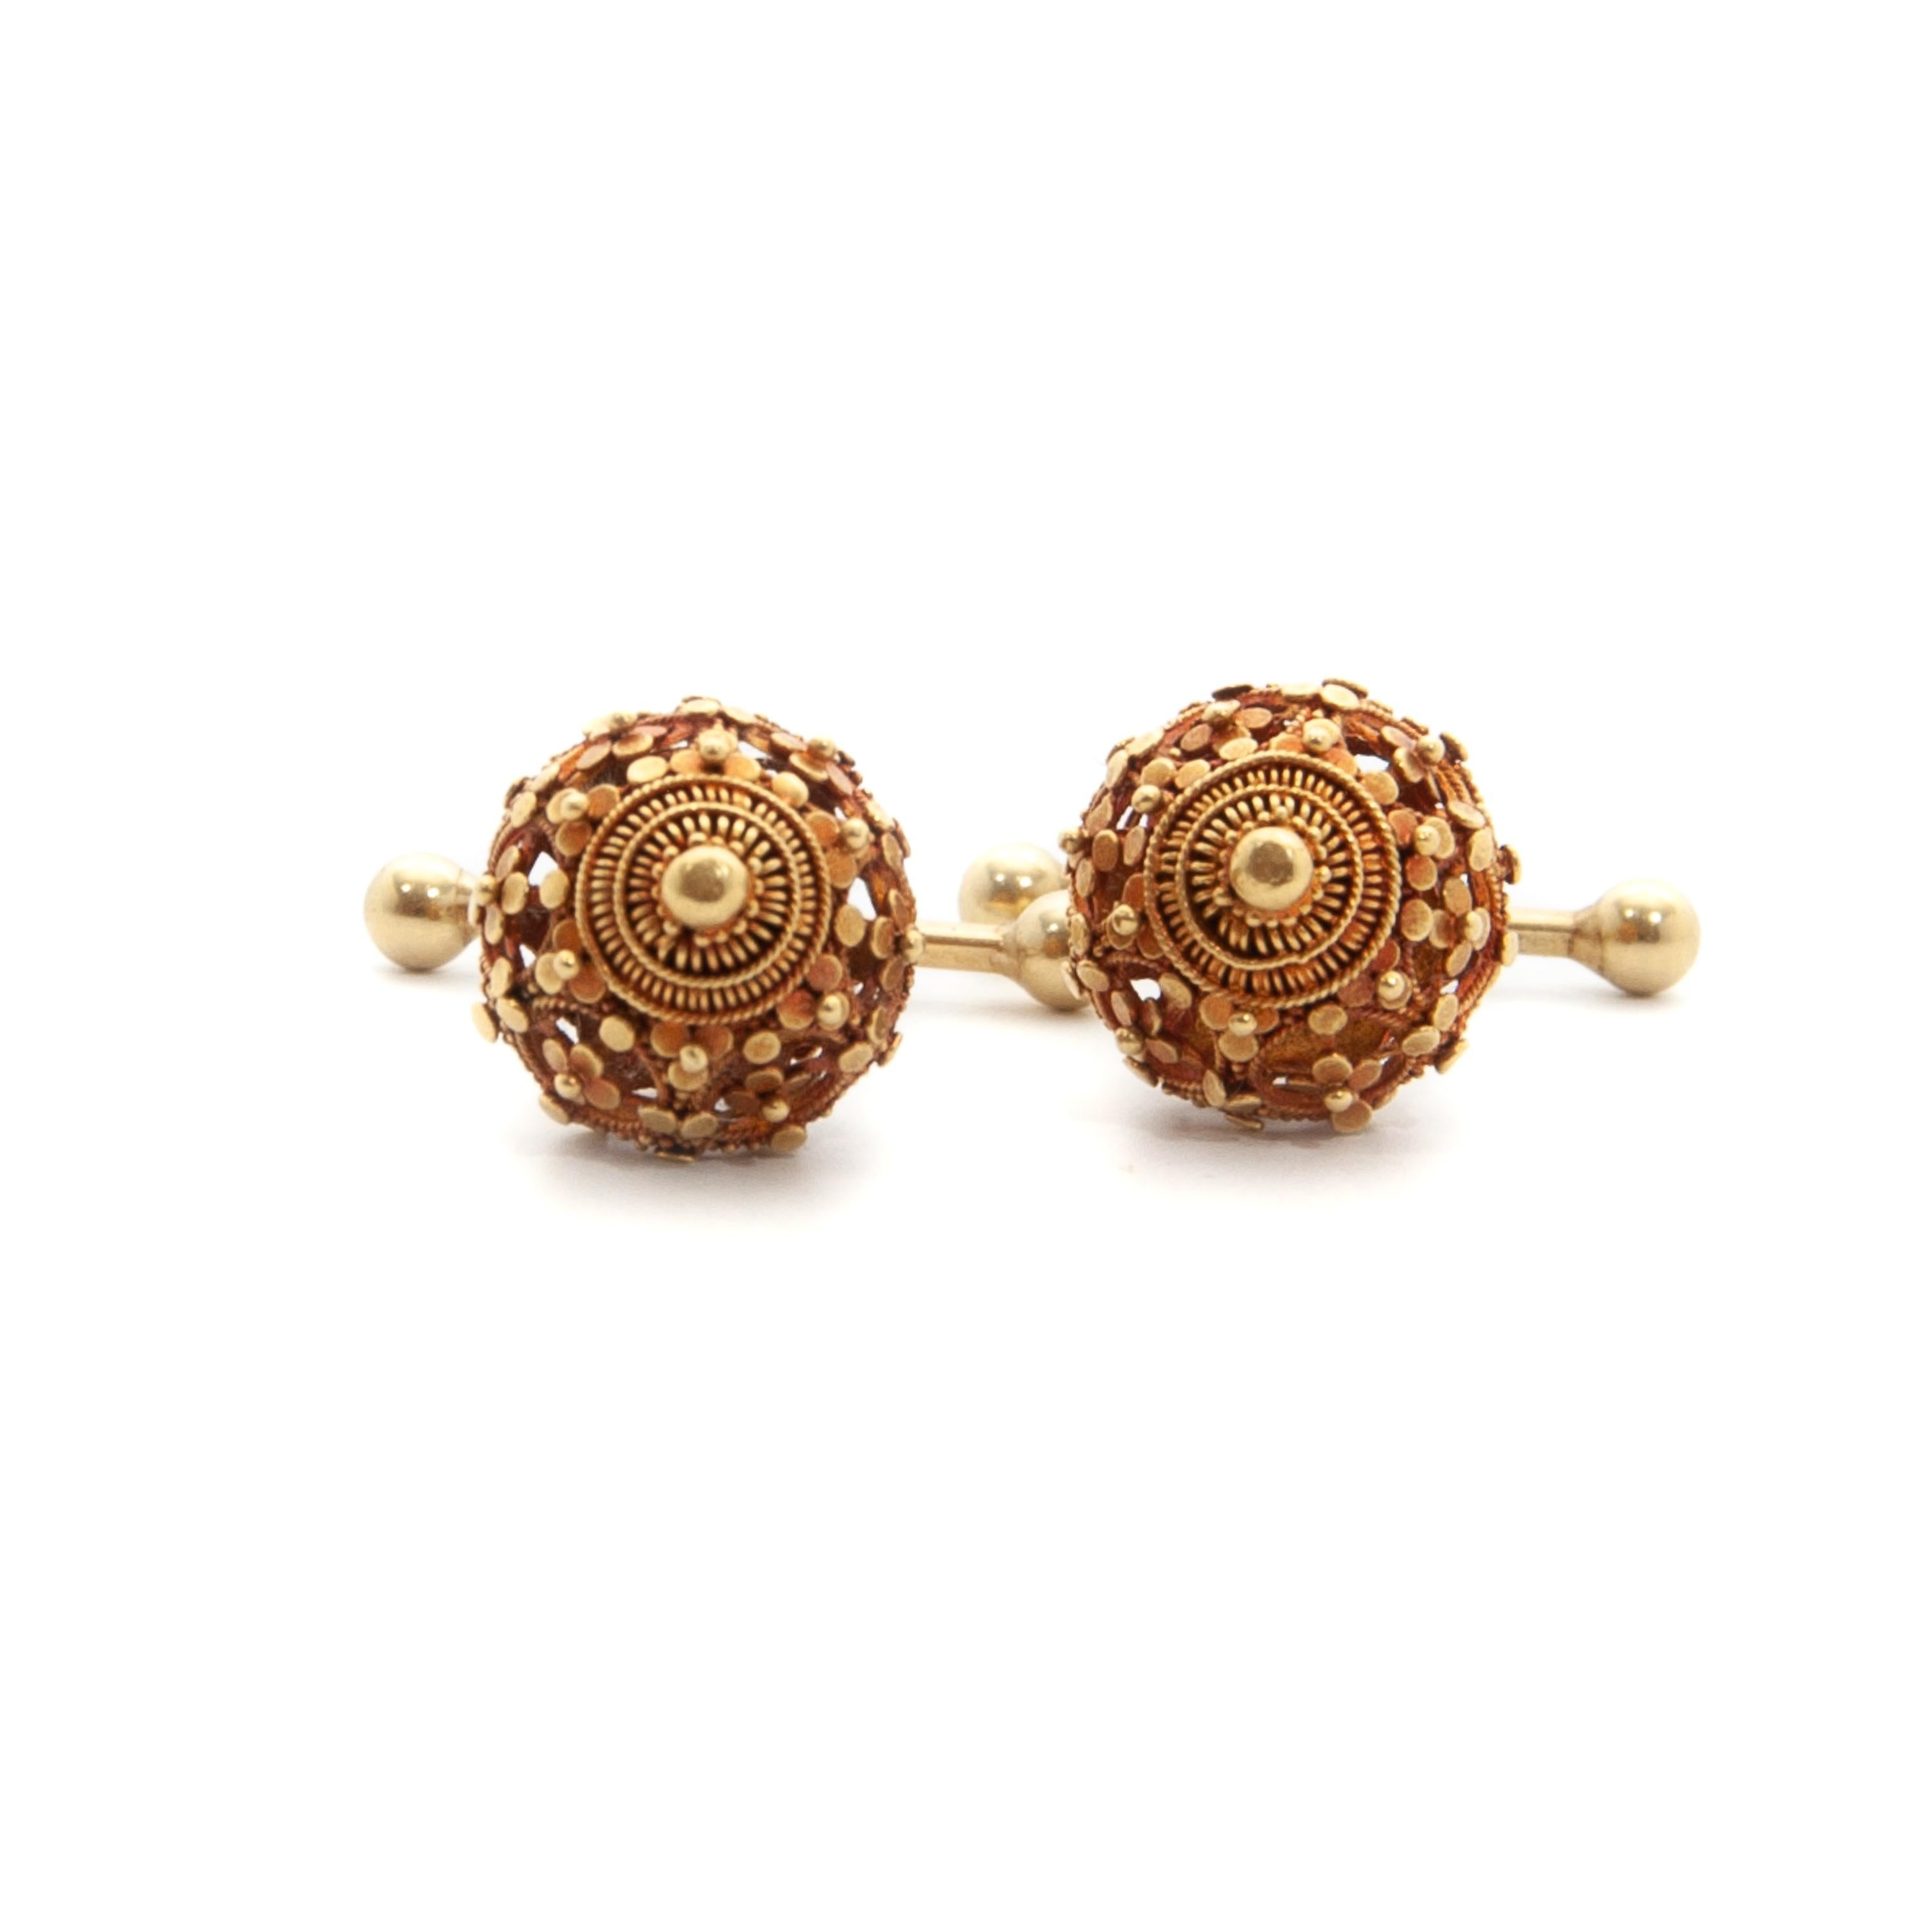 A magnificent pair of 14 karat gold cannetille and filigree round openwork cufflinks. These early 20th century gold cufflinks have a beautiful design with an openwork structure, decorated with gold flowers and fine granulation. At the top of the